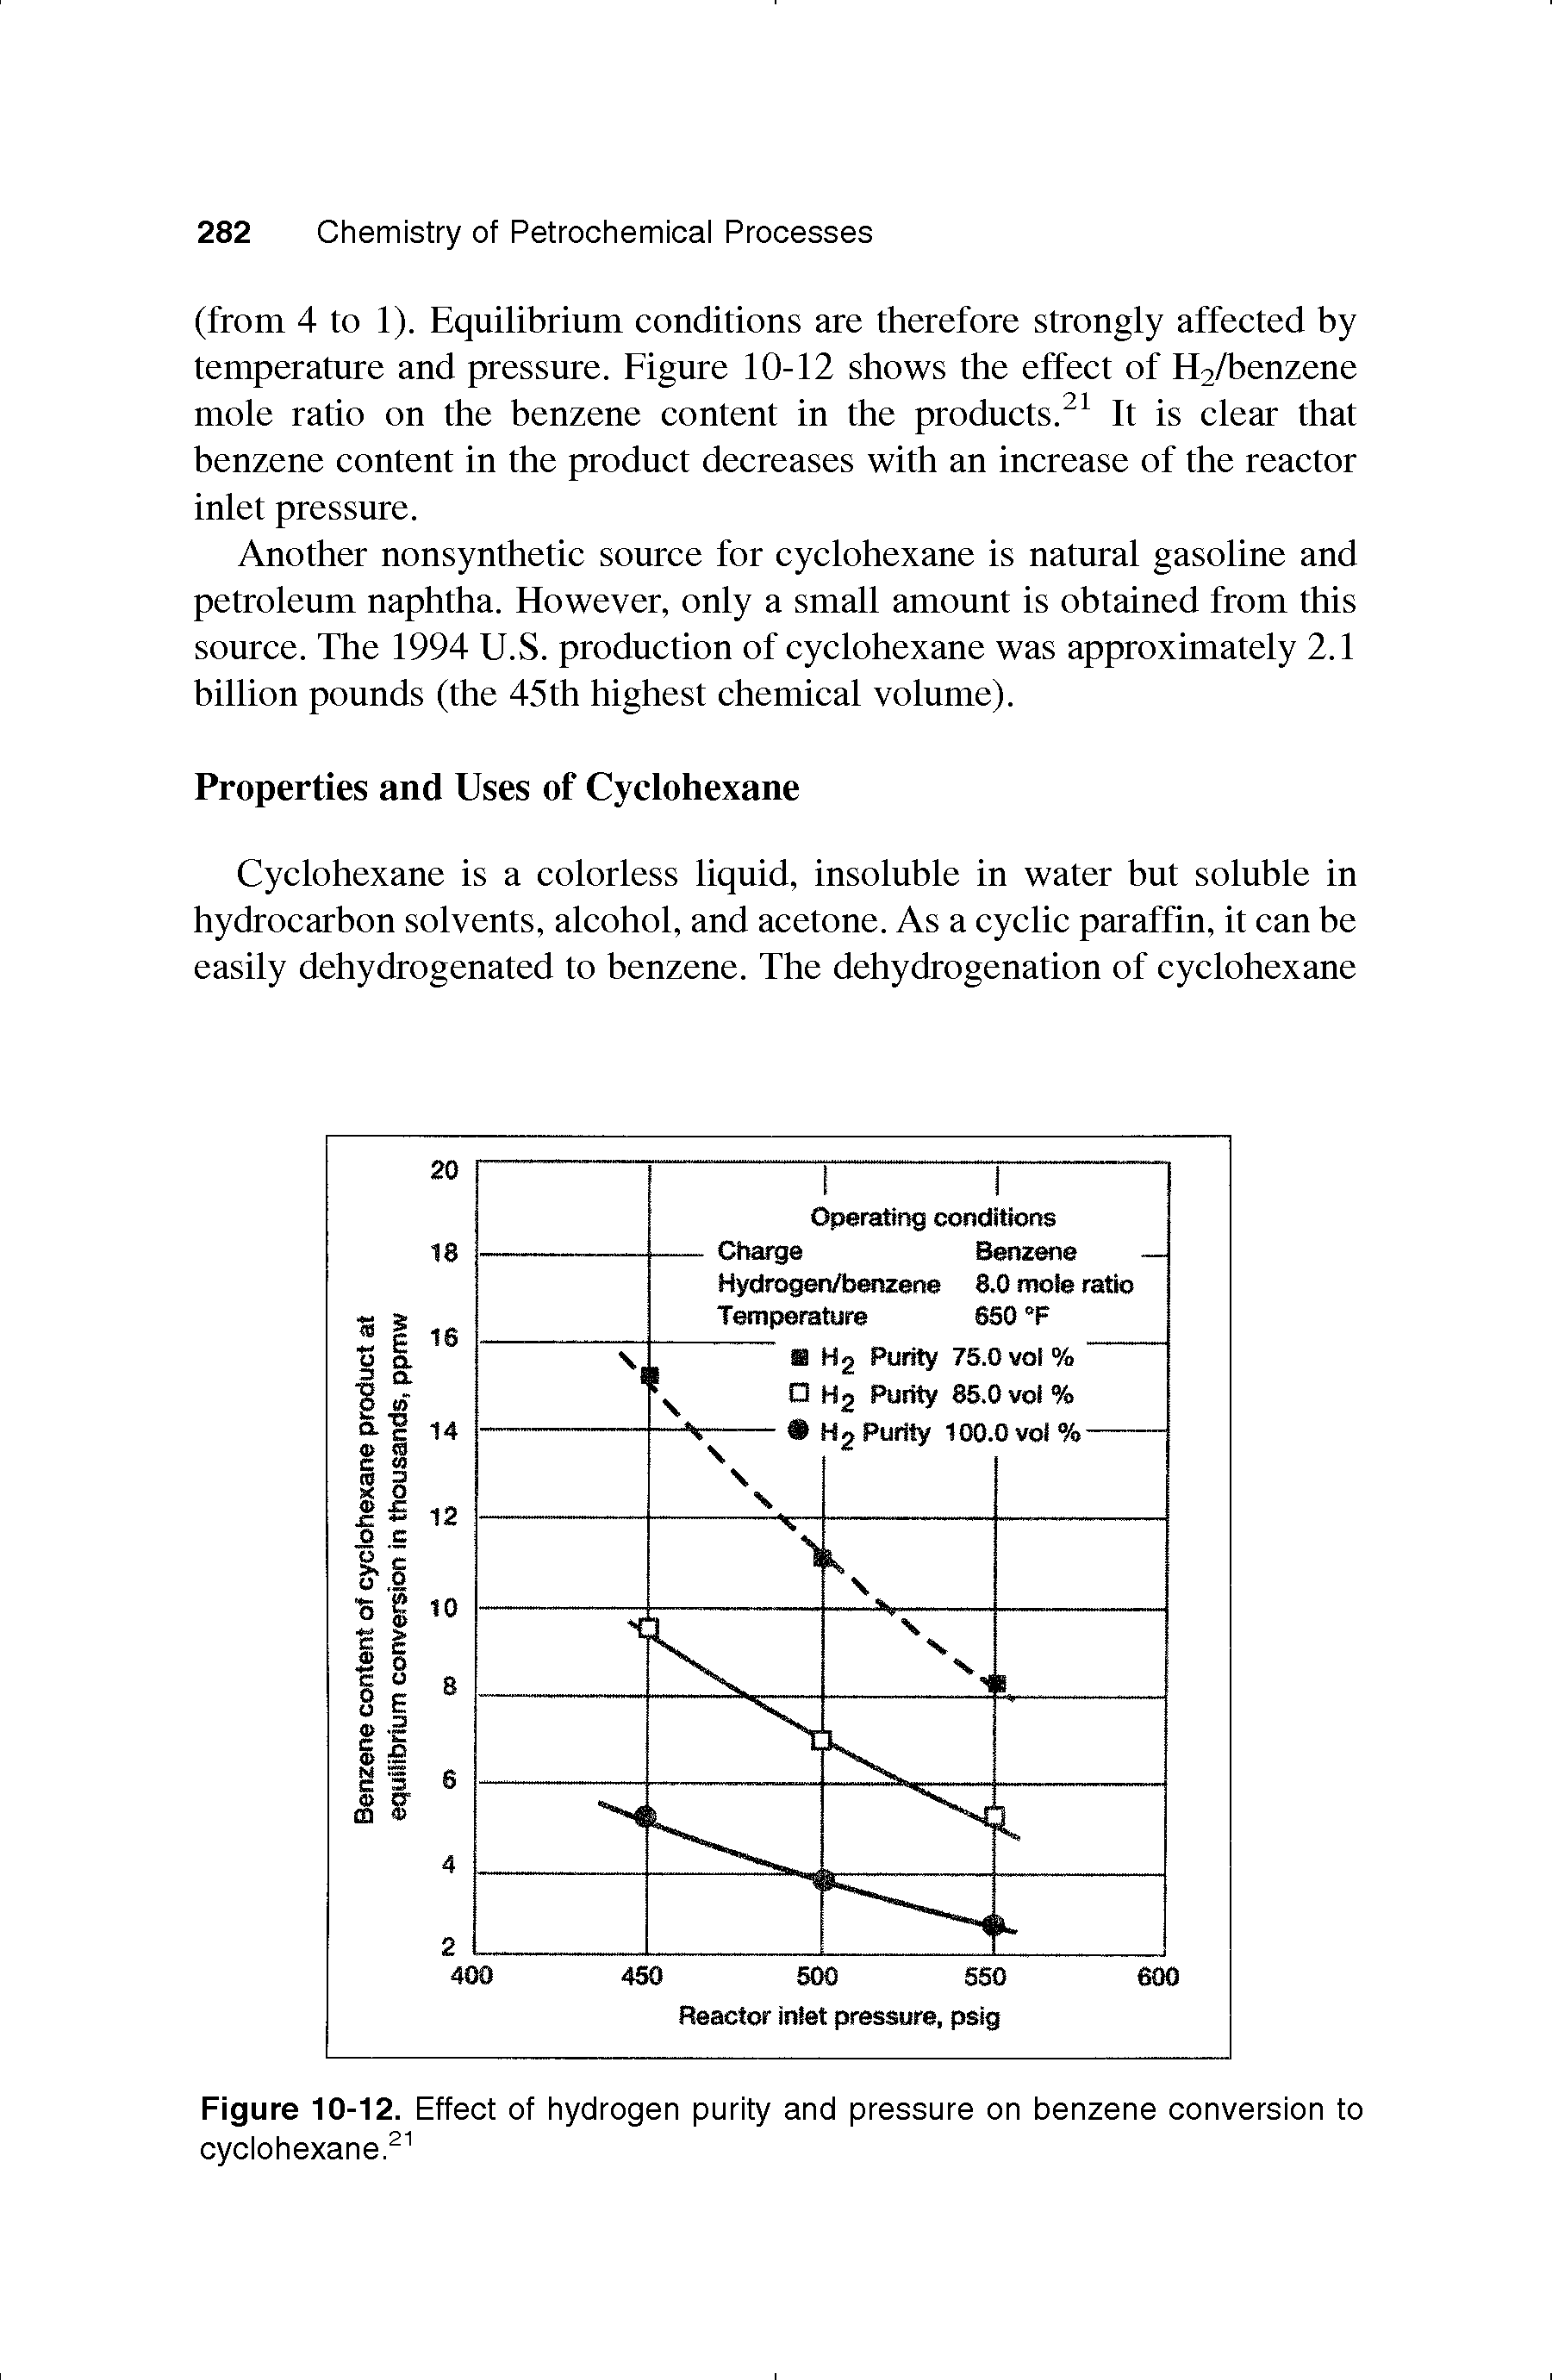 Figure 10-12. Effect of hydrogen purity and pressure on benzene conversion to cyclohexane. ...